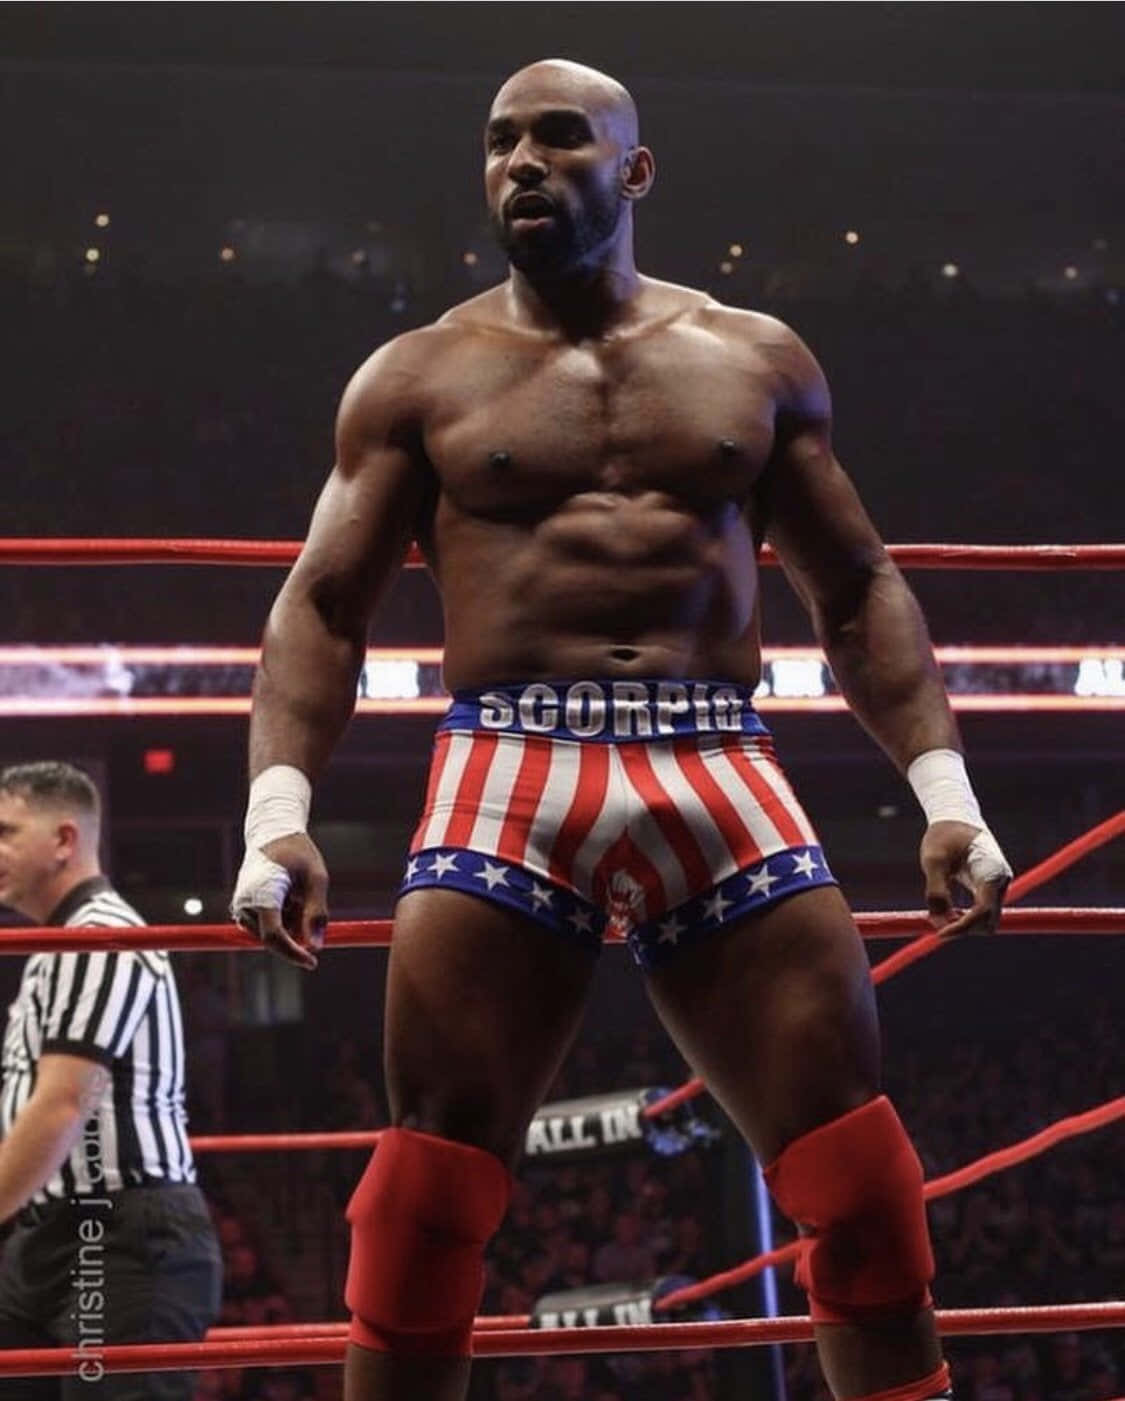 This is an image of Apollo Creed I selected this representation not just  because of his name but because of his attitude and   Apollo creed Creed  Rocky balboa